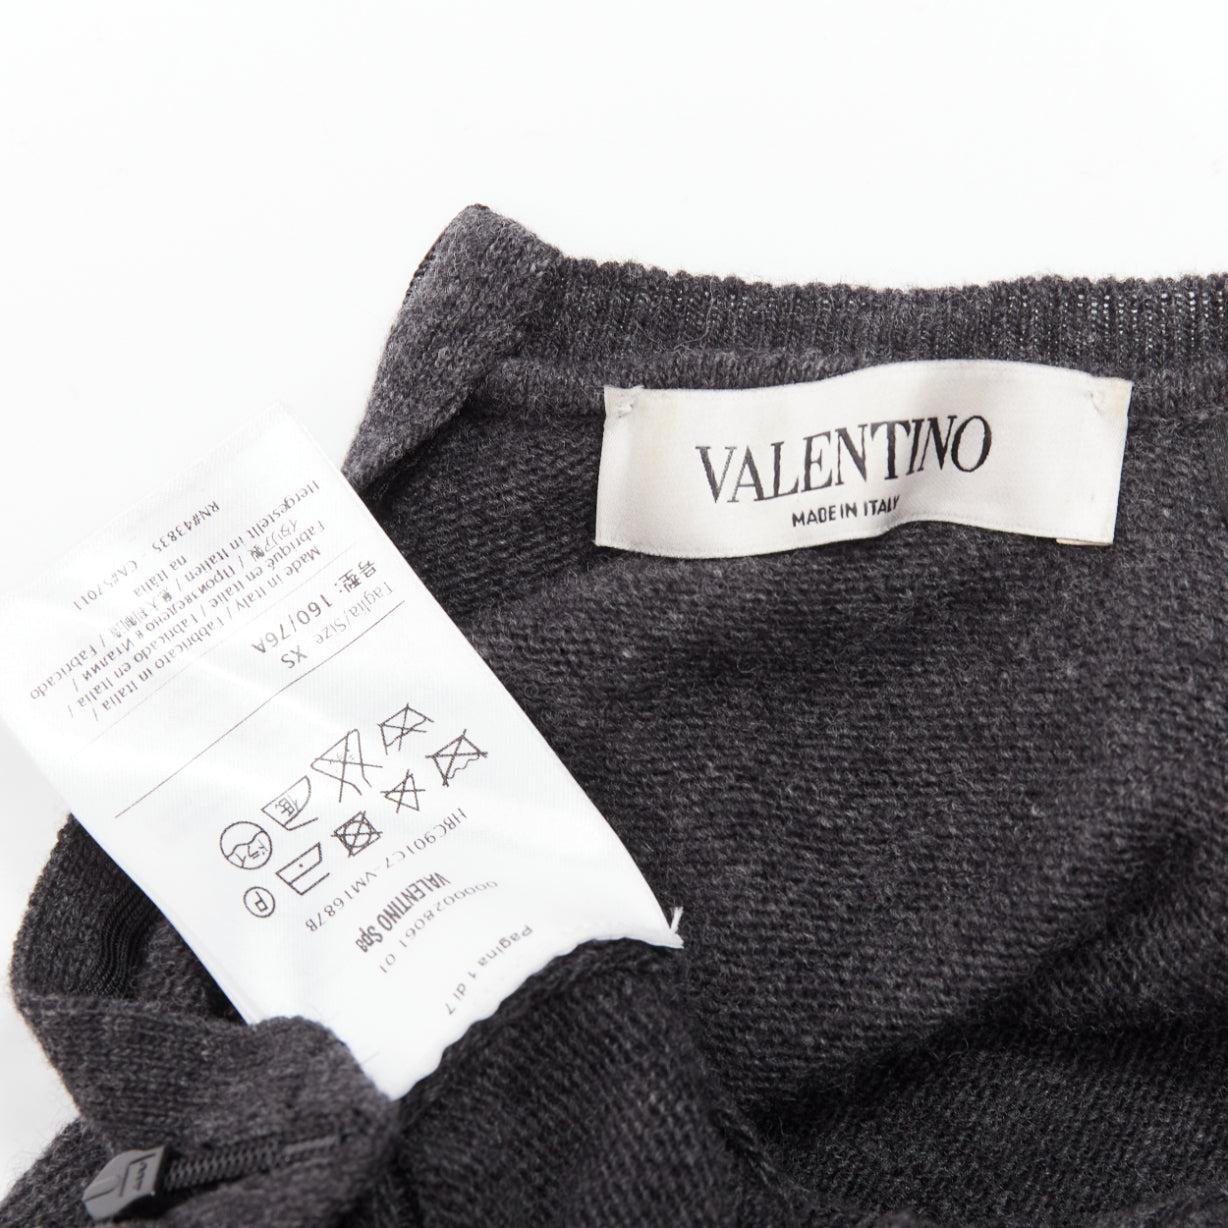 VALENTINO grey black lace virgin wool cashmere crew neck sweater XS For Sale 5